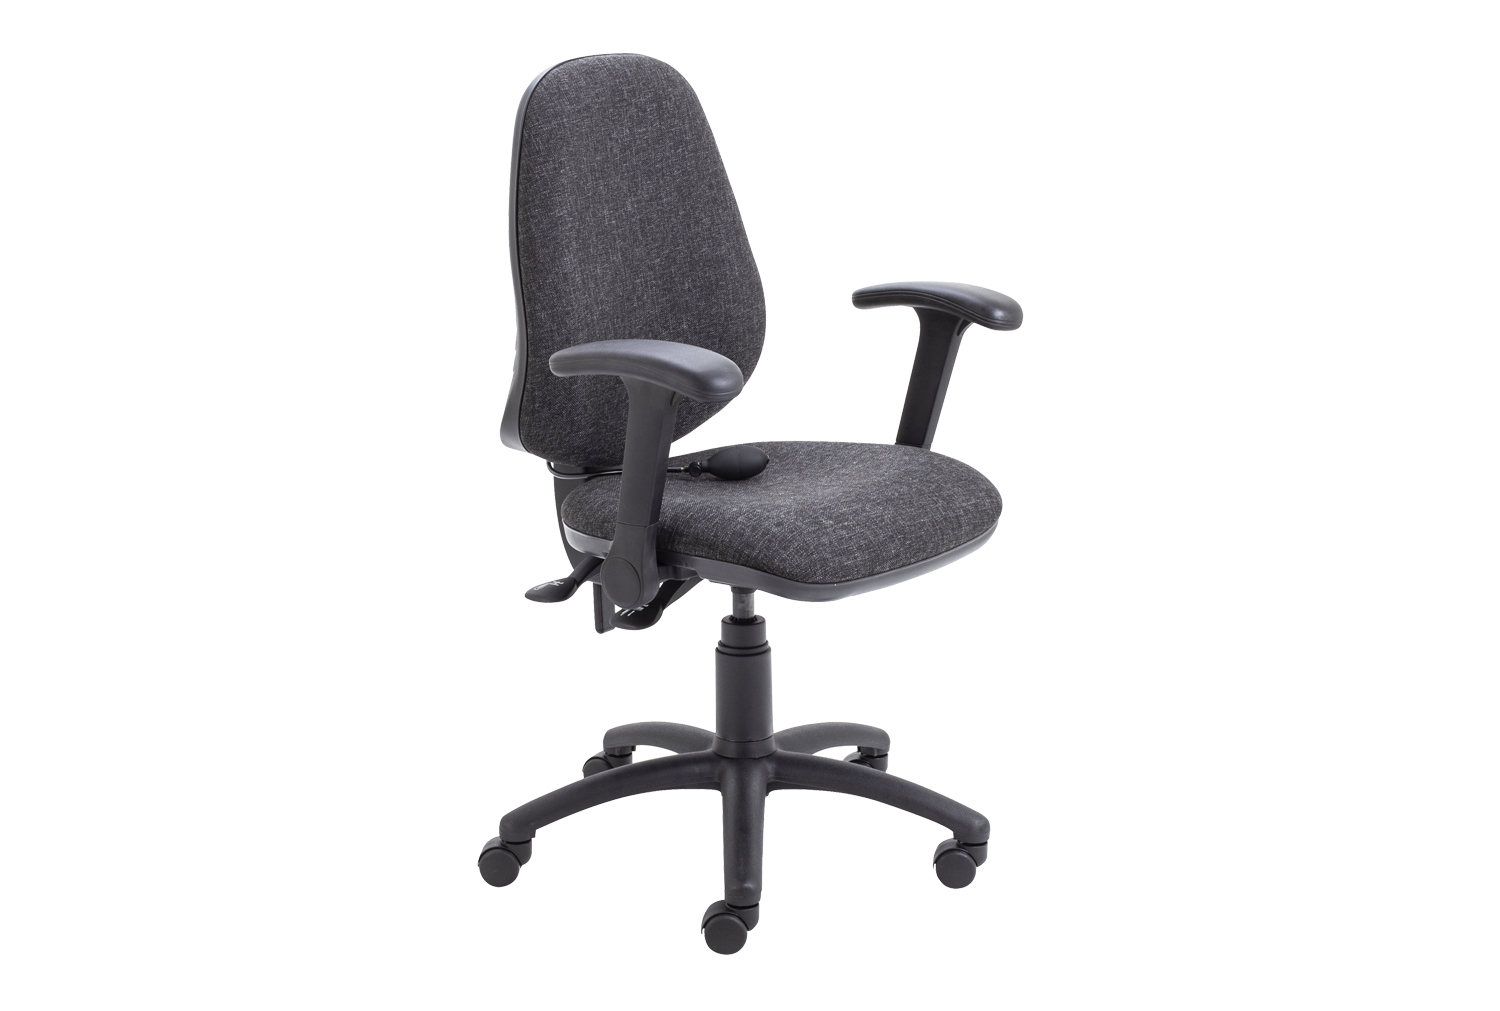 Orchid Lumbar Pump Ergonomic Operator Office Chair With Folding Arms, Charcoal, Fully Installed